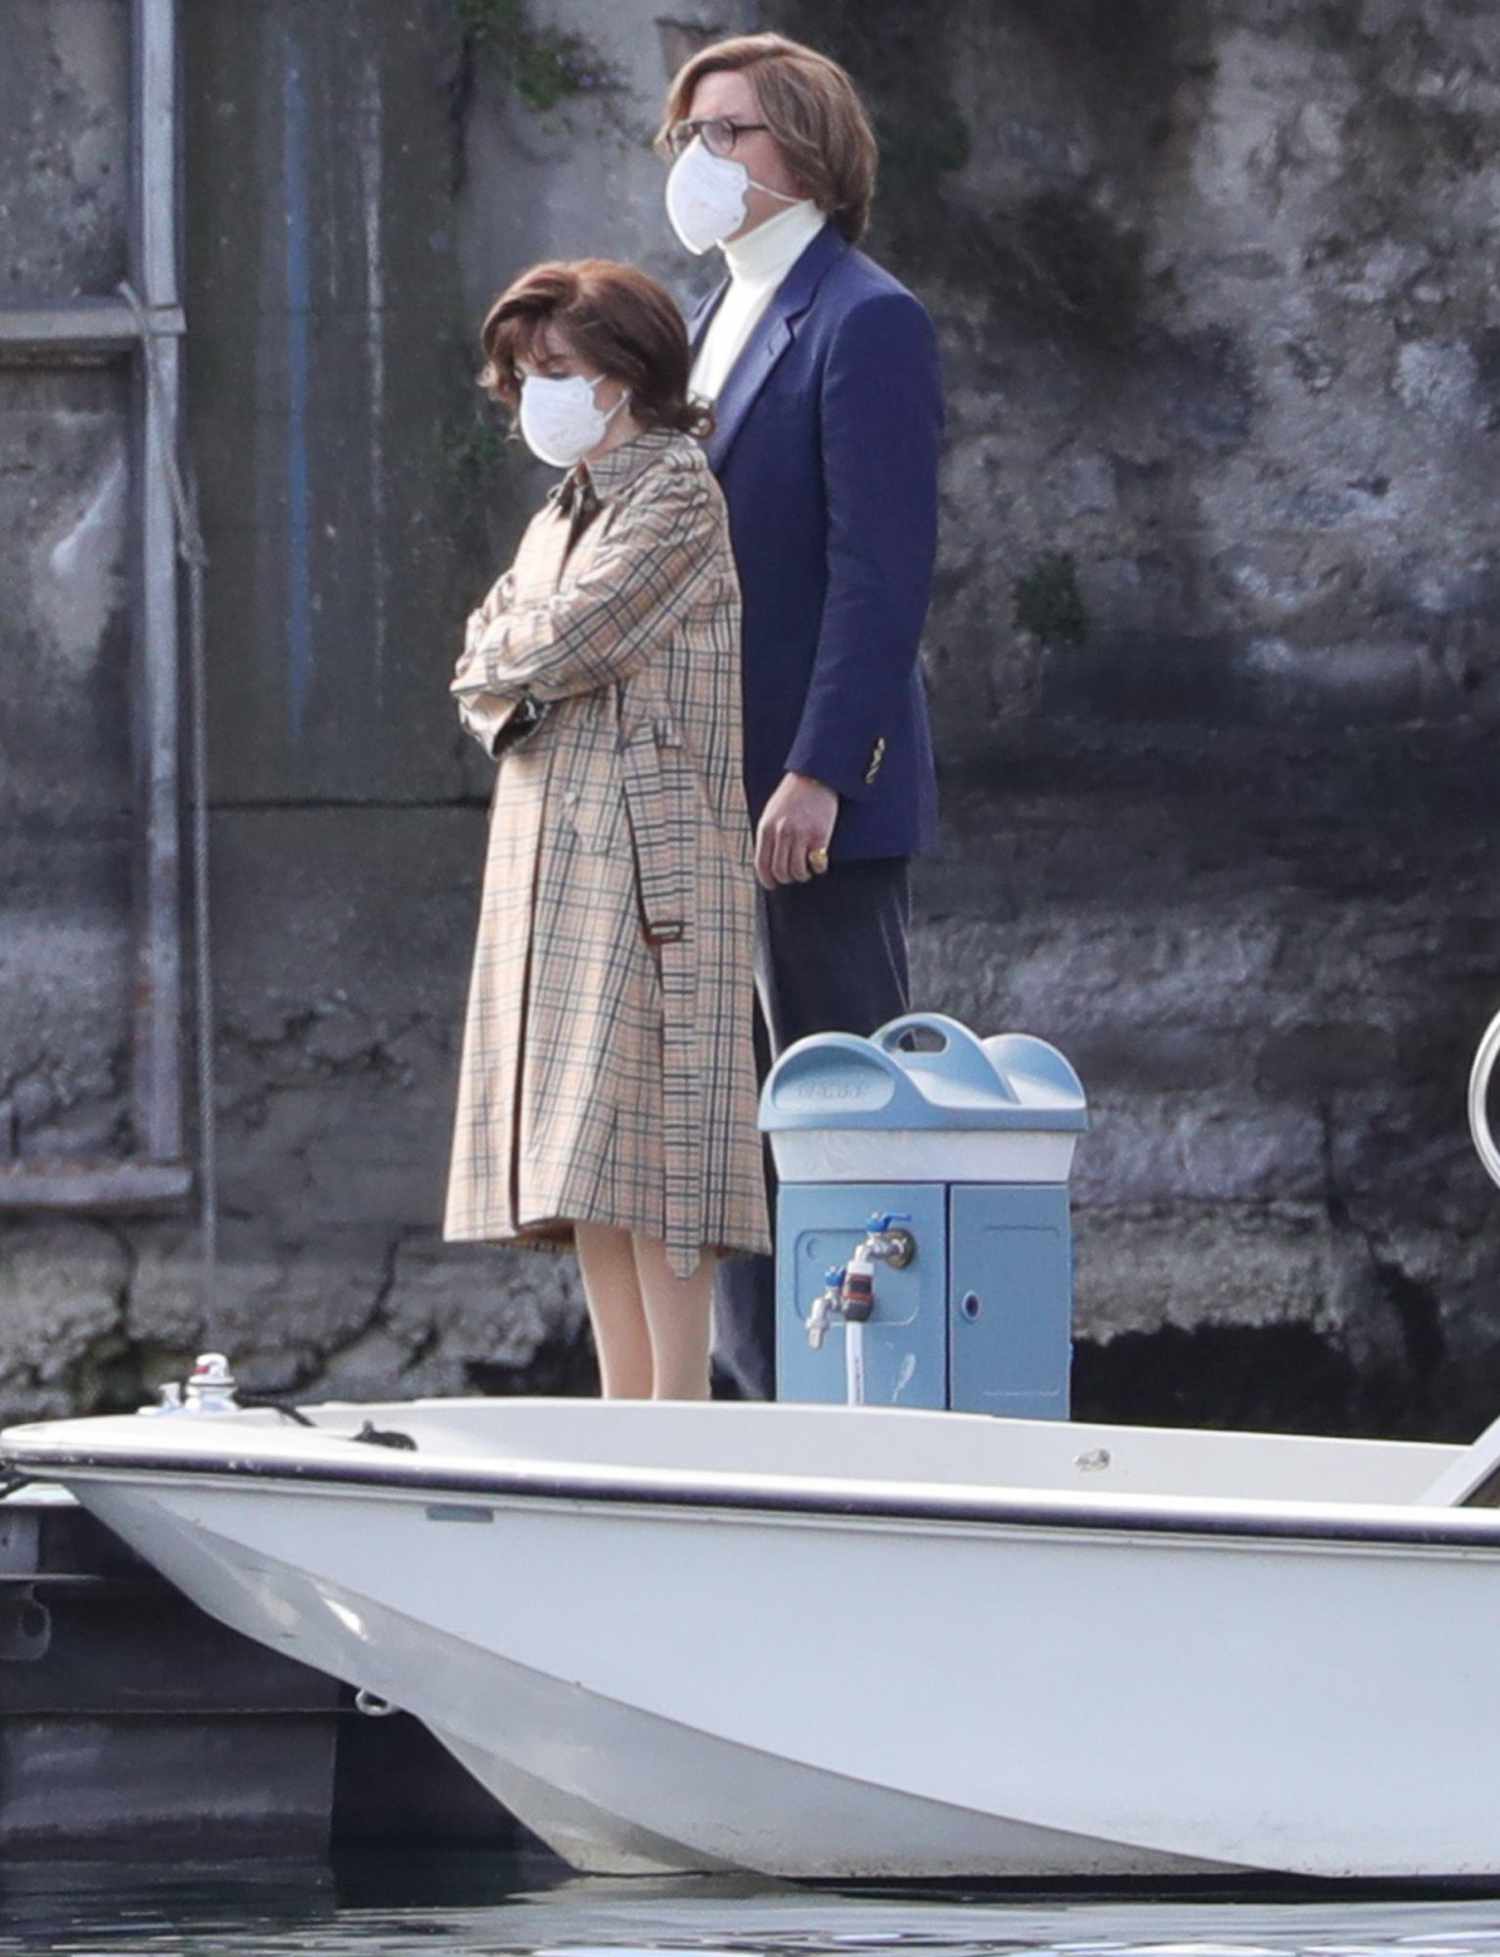 Lady Gaga and Adam Driver are seen filming "House Of Gucci" on March 18, 2021 in Como, Italy